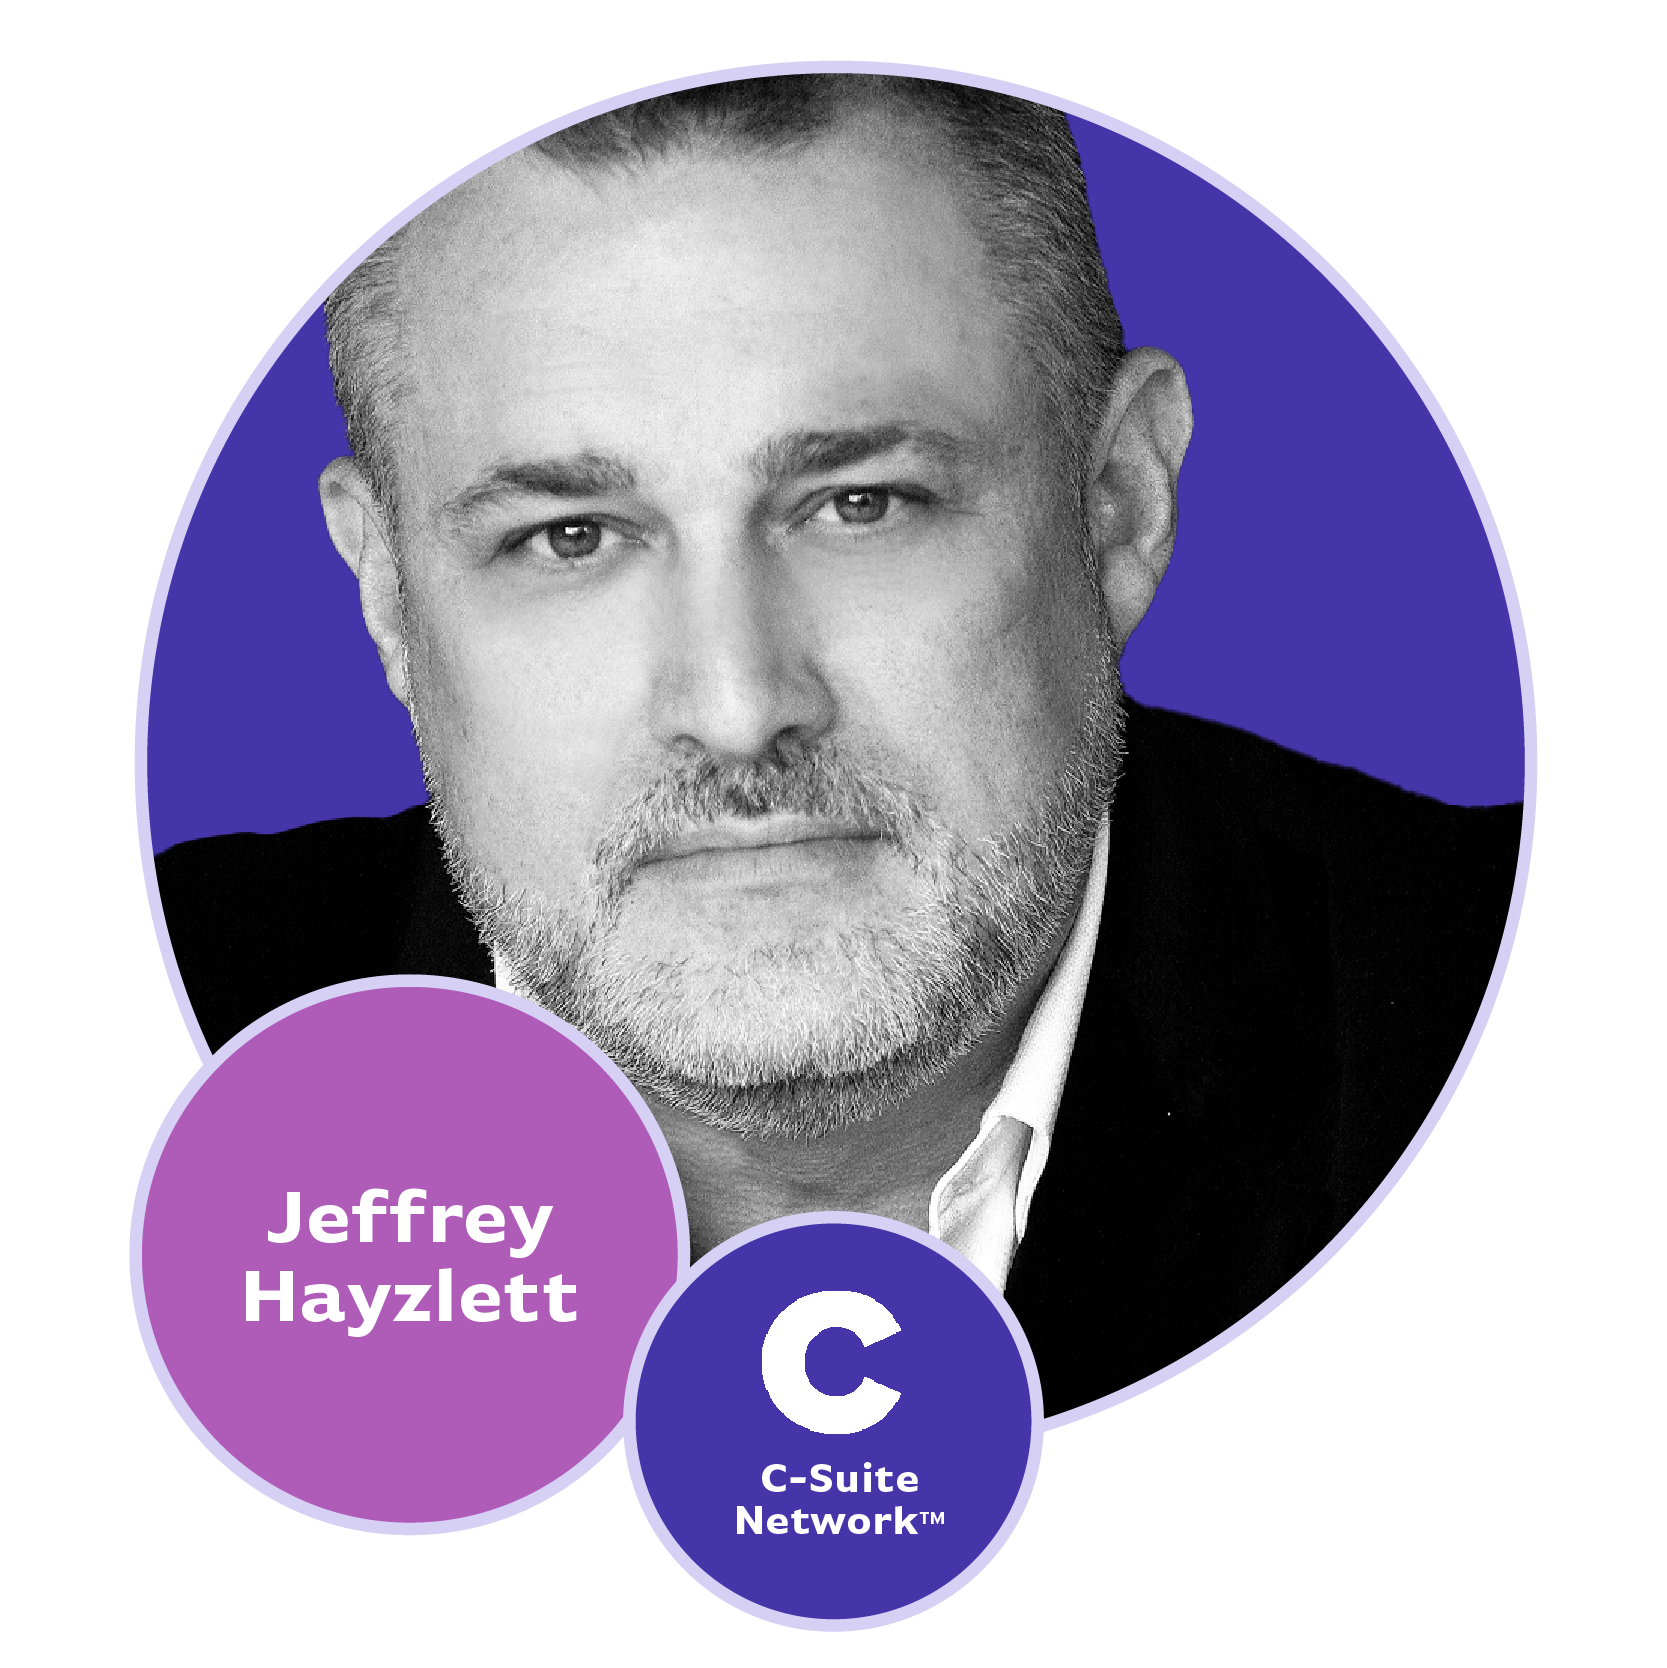 Headshot of Jeffrey Hayzlett in a circle with his name and company title, C-Suite Network